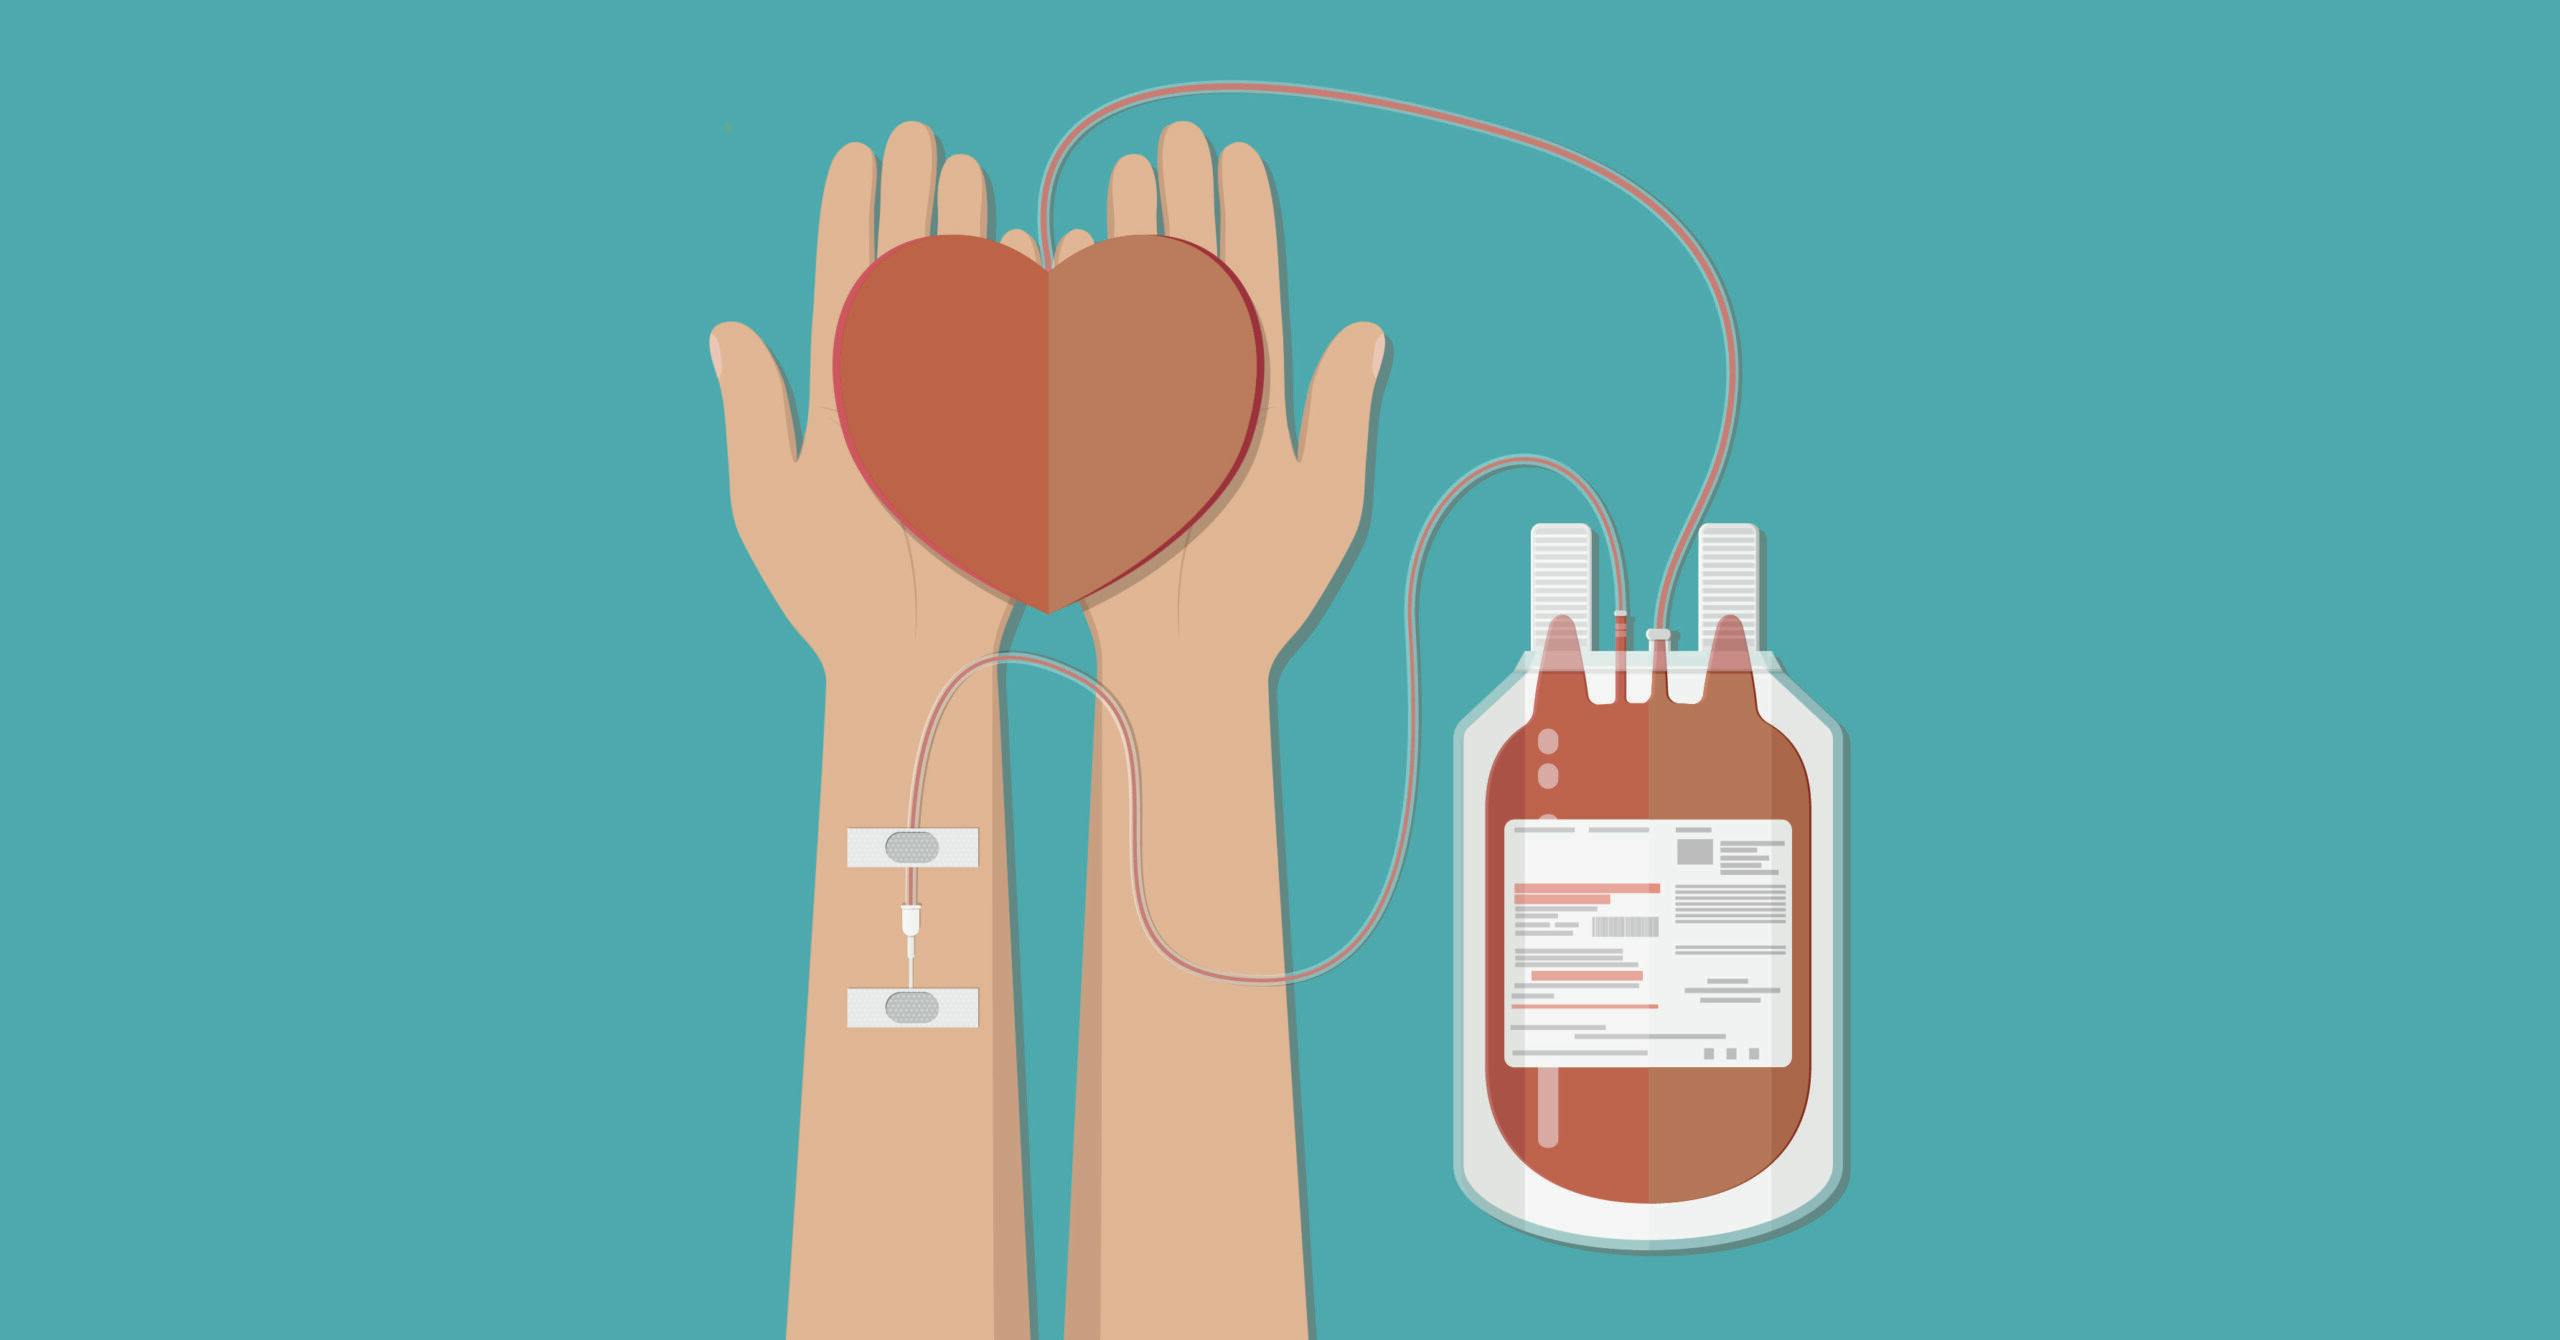 illustration of hands holding a heart while donating blood